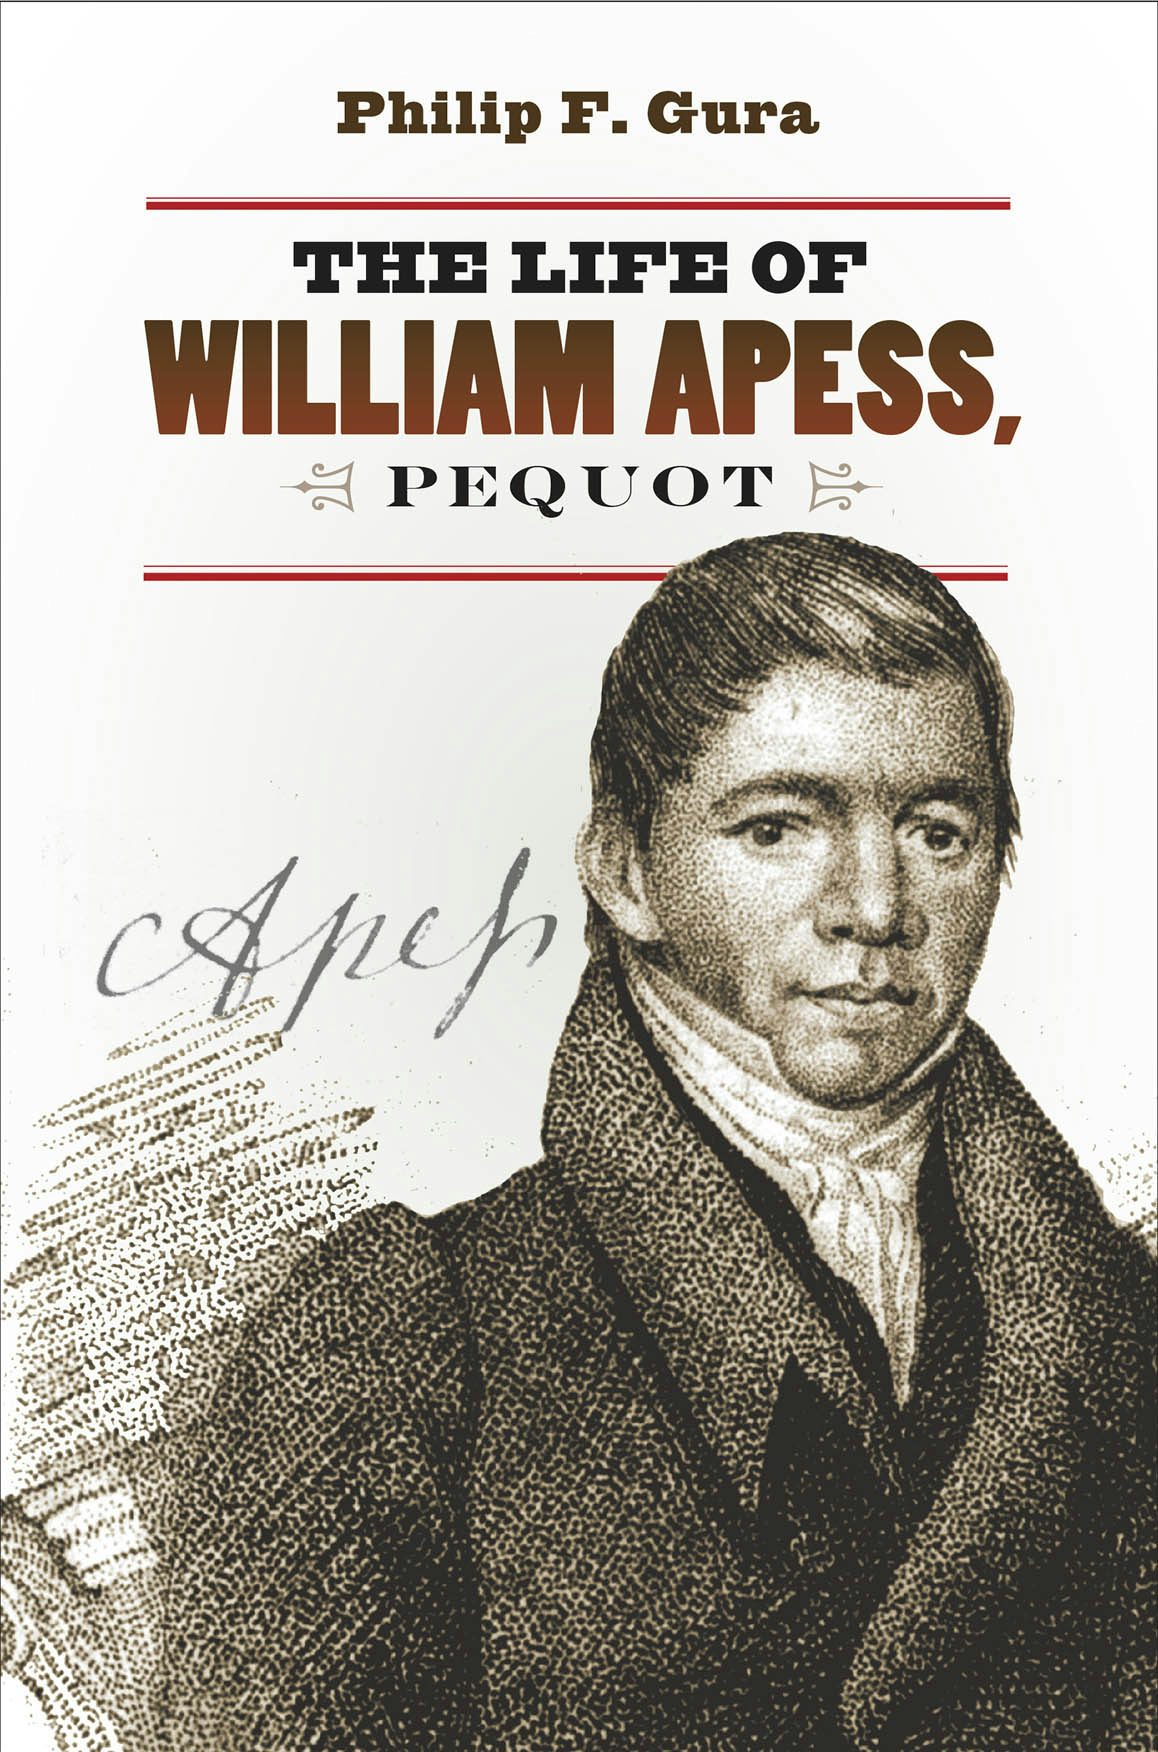 william apess a son of the forest